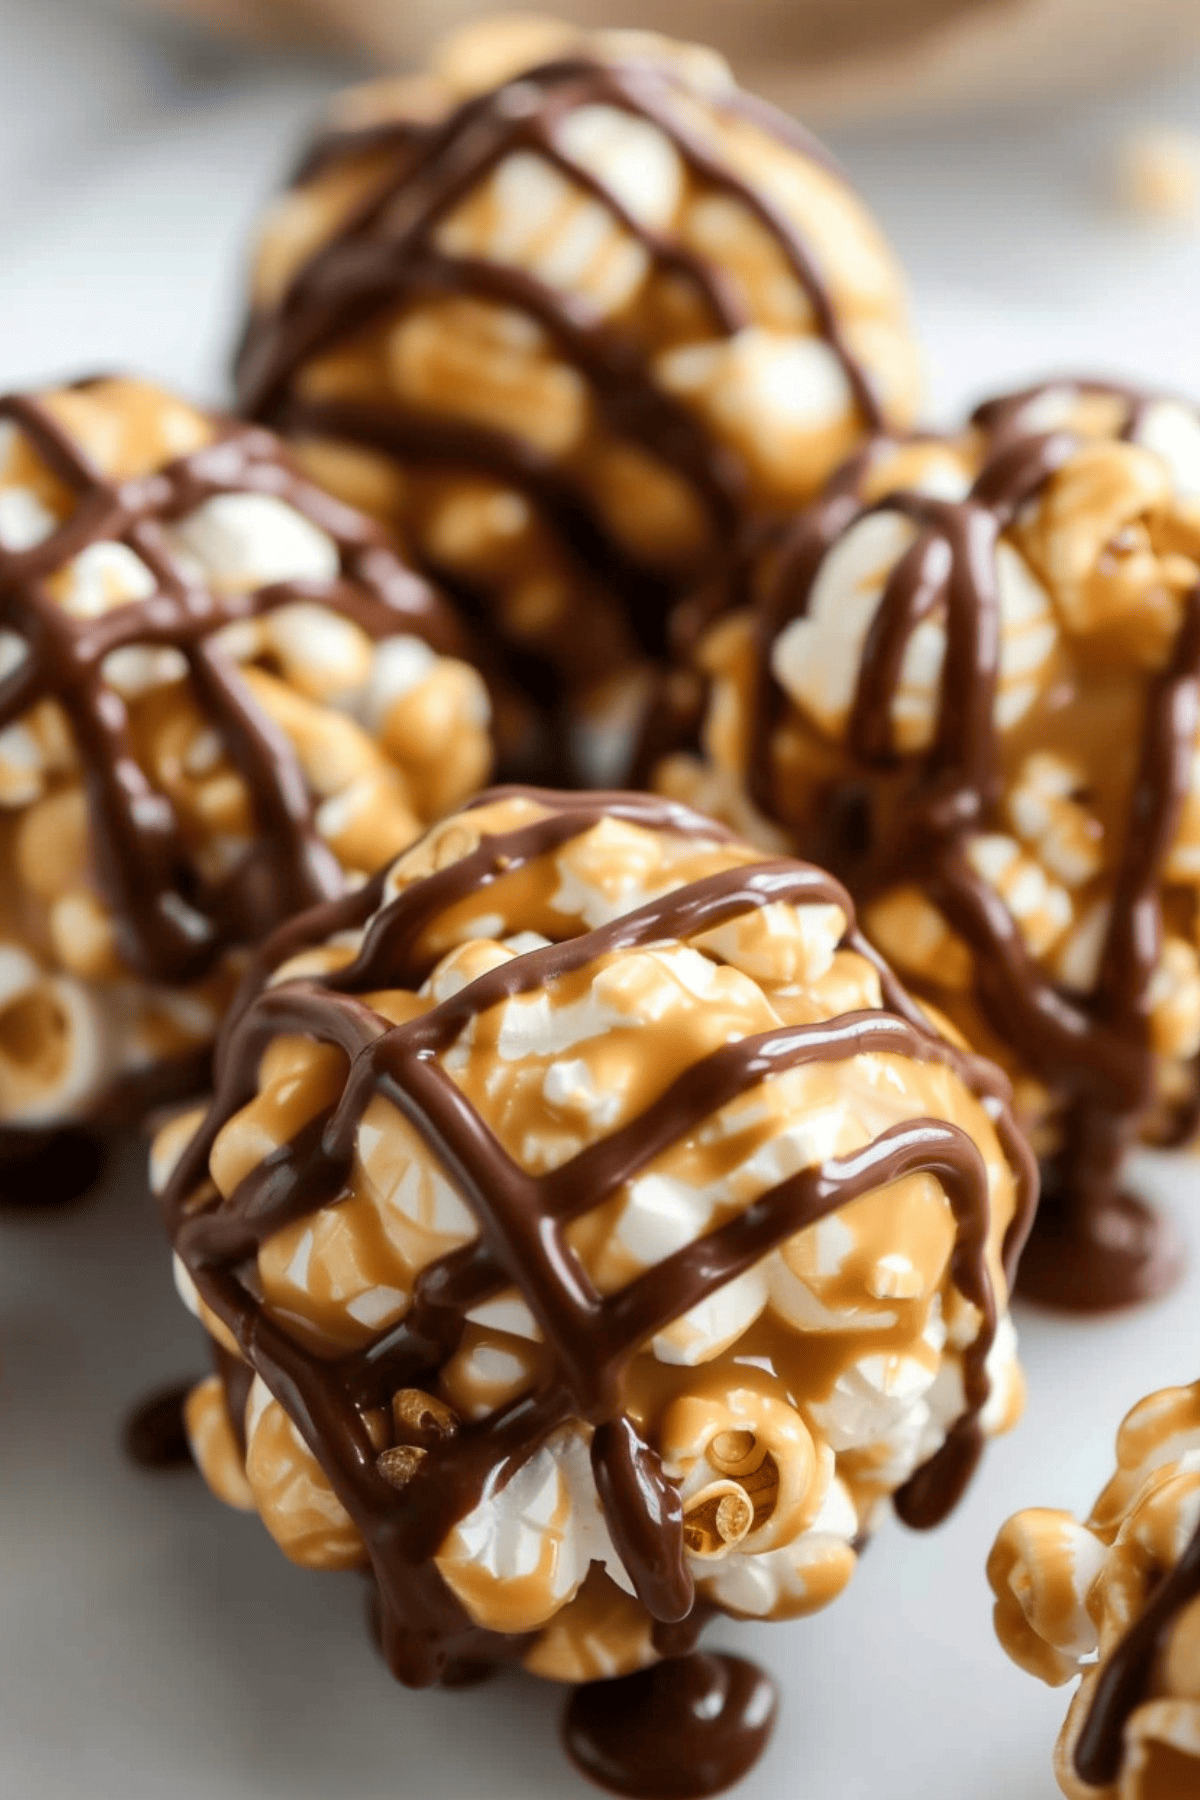 Homemade Peanut Butter Popcorn Balls drizzled with chocolate